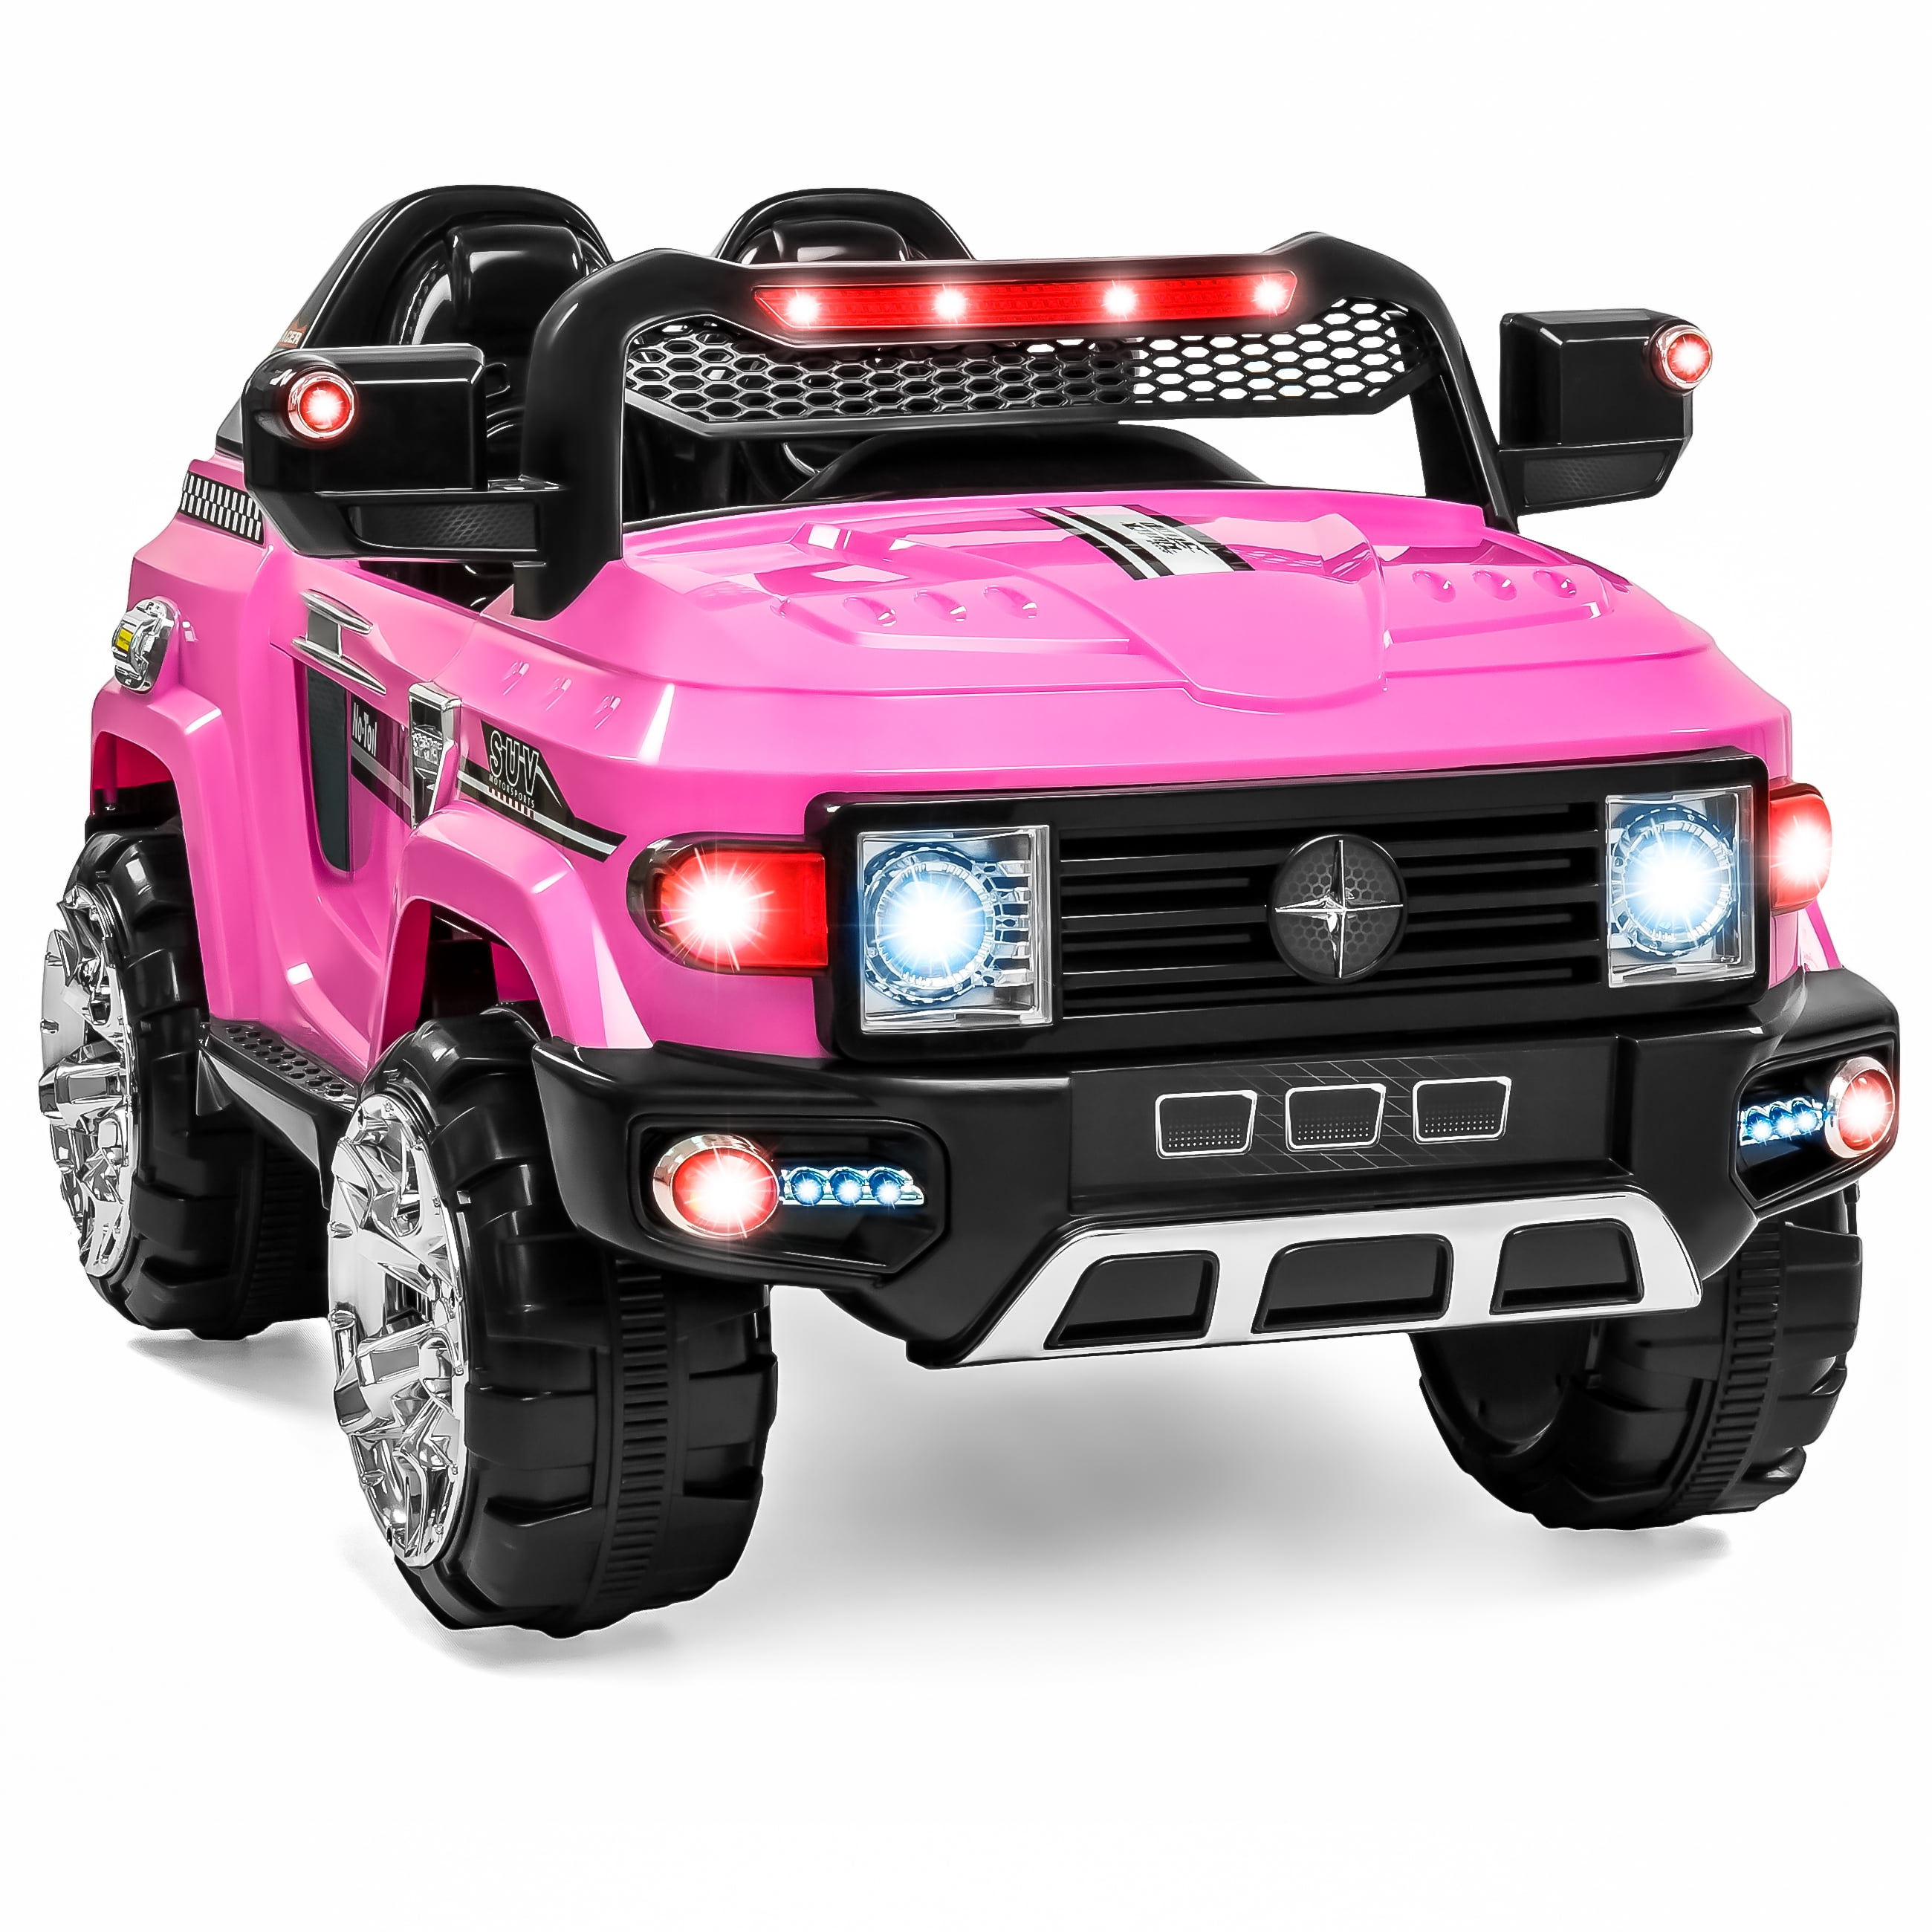 Kids Ride on Car Electric Powered Battery Wheel Remote Control 12V 3 Speed Pink. 